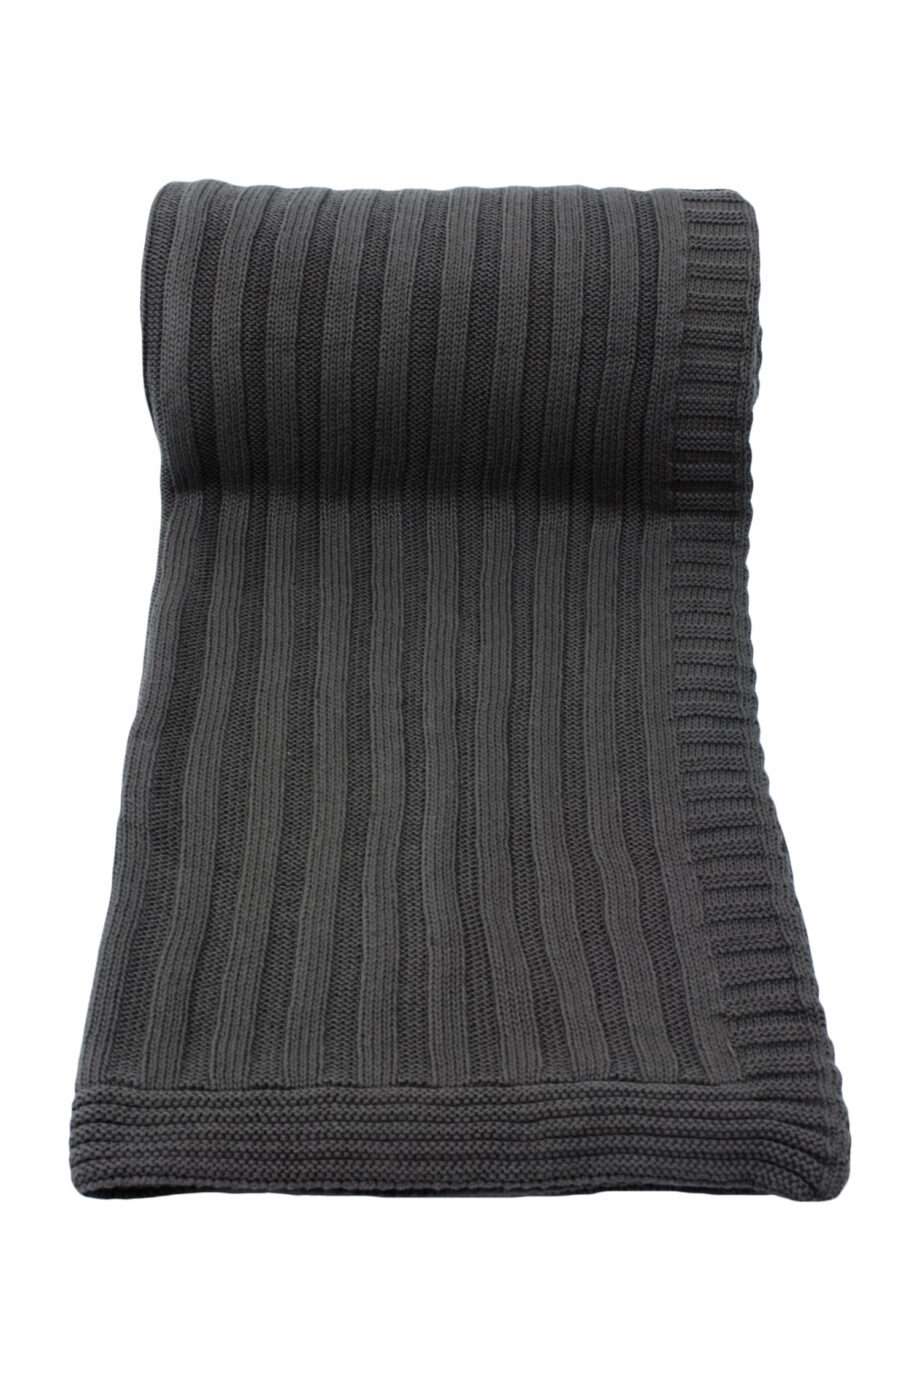 ribs anthracite knitted cotton throw large